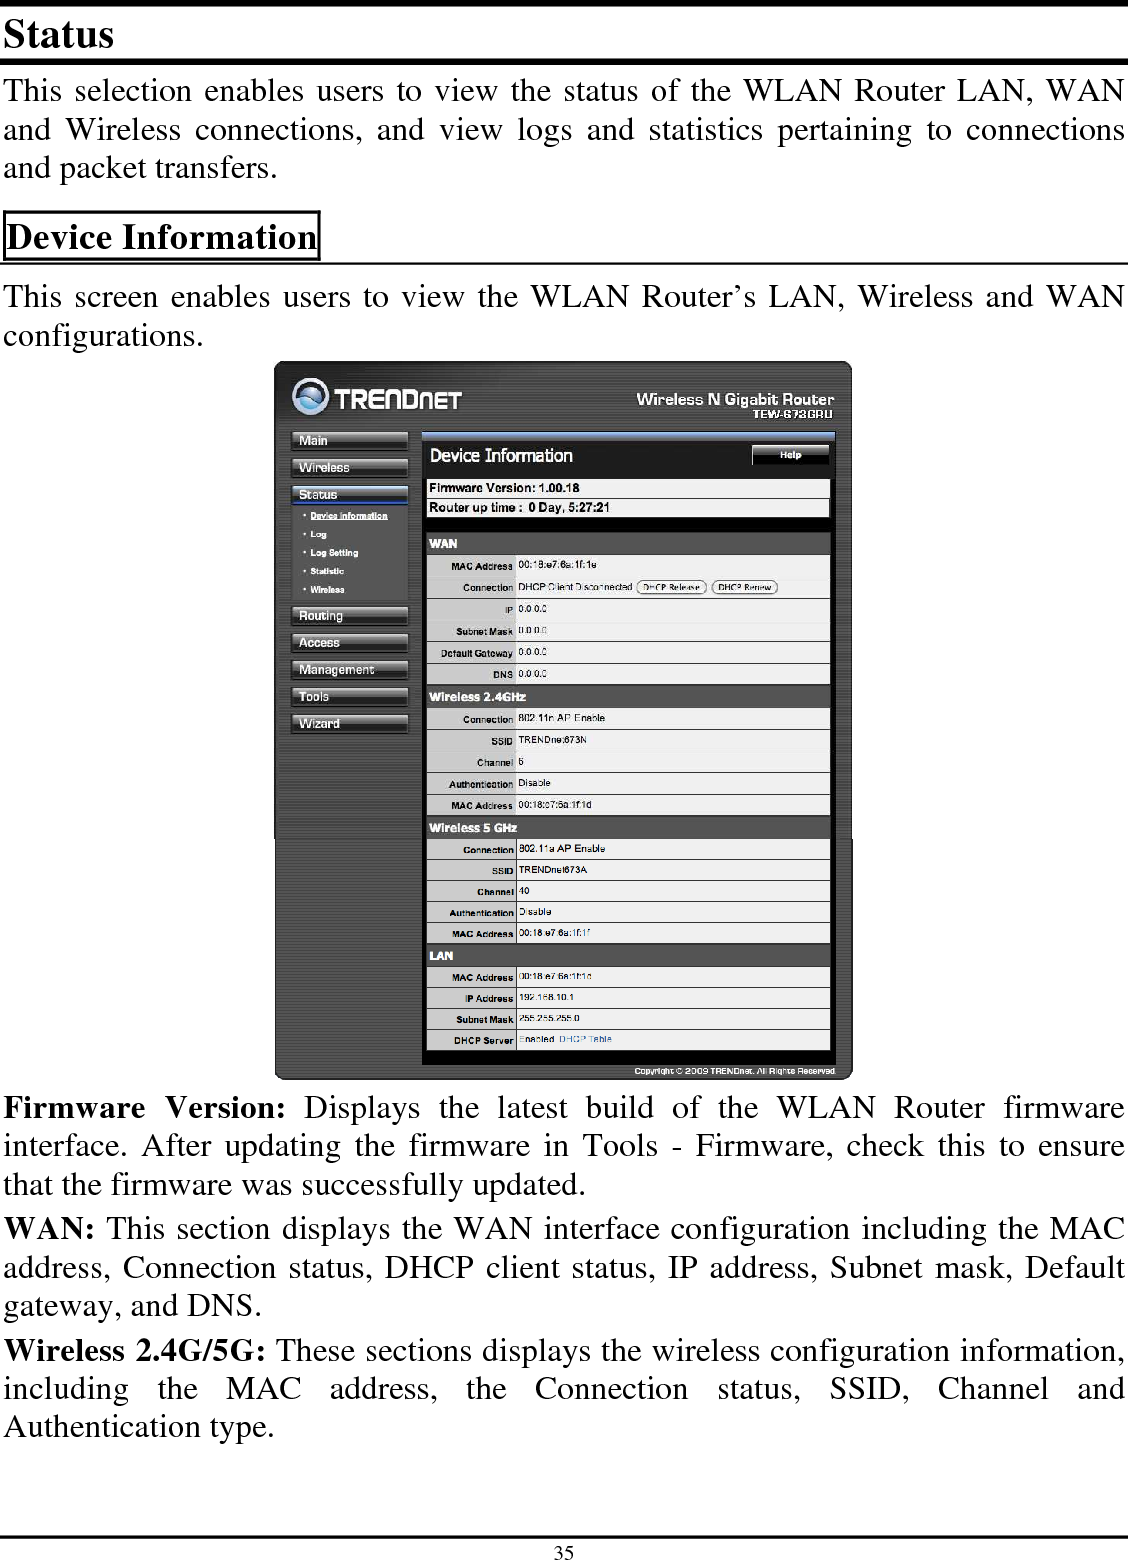 35 Status This selection enables users to view the status of the WLAN Router LAN, WAN and  Wireless  connections,  and  view  logs  and  statistics  pertaining  to  connections and packet transfers. Device Information This screen enables users to view the WLAN Router’s LAN, Wireless and WAN configurations.  Firmware  Version:  Displays  the  latest  build  of  the  WLAN  Router  firmware interface.  After updating  the firmware in  Tools - Firmware, check this  to ensure that the firmware was successfully updated. WAN: This section displays the WAN interface configuration including the MAC address, Connection status, DHCP client status, IP address, Subnet mask, Default gateway, and DNS.  Wireless 2.4G/5G: These sections displays the wireless configuration information, including  the  MAC  address,  the  Connection  status,  SSID,  Channel  and Authentication type. 